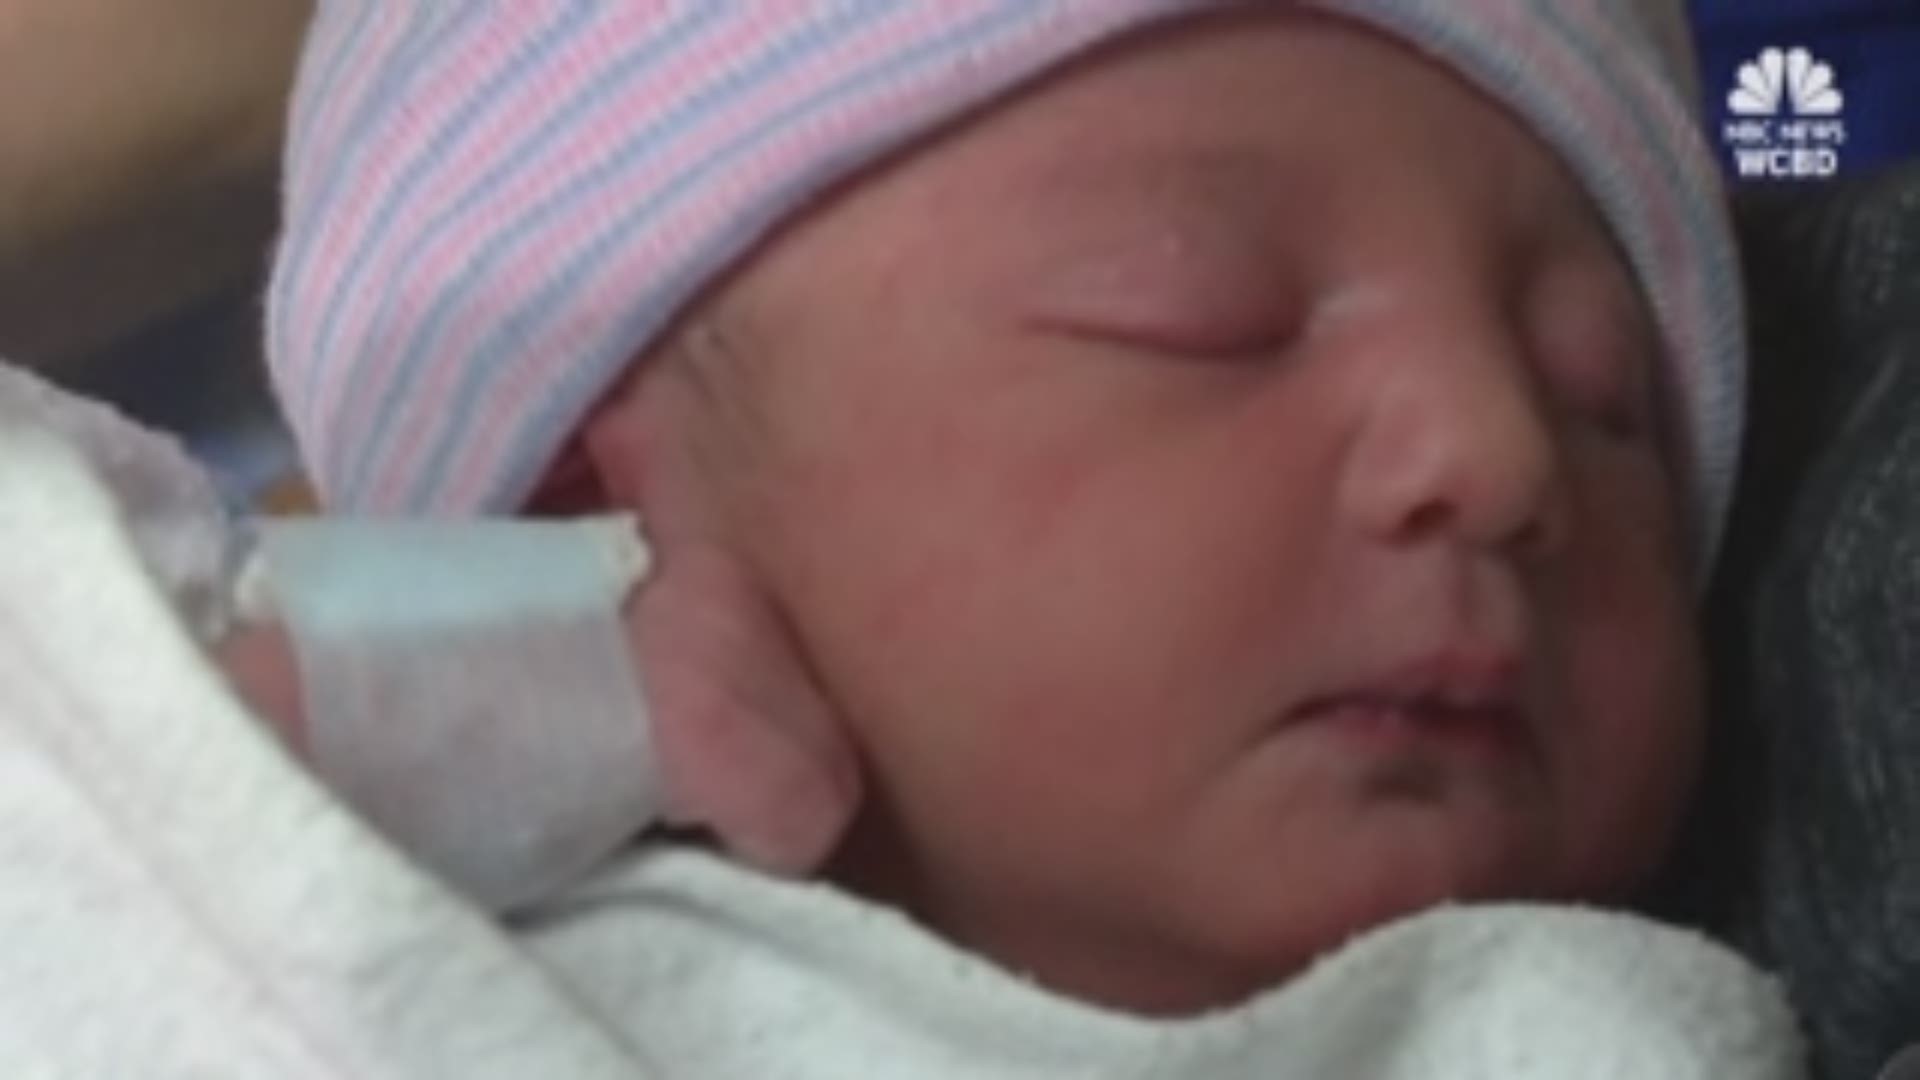 New Year's baby was born on the highway as parents were being chased by police for speeding.